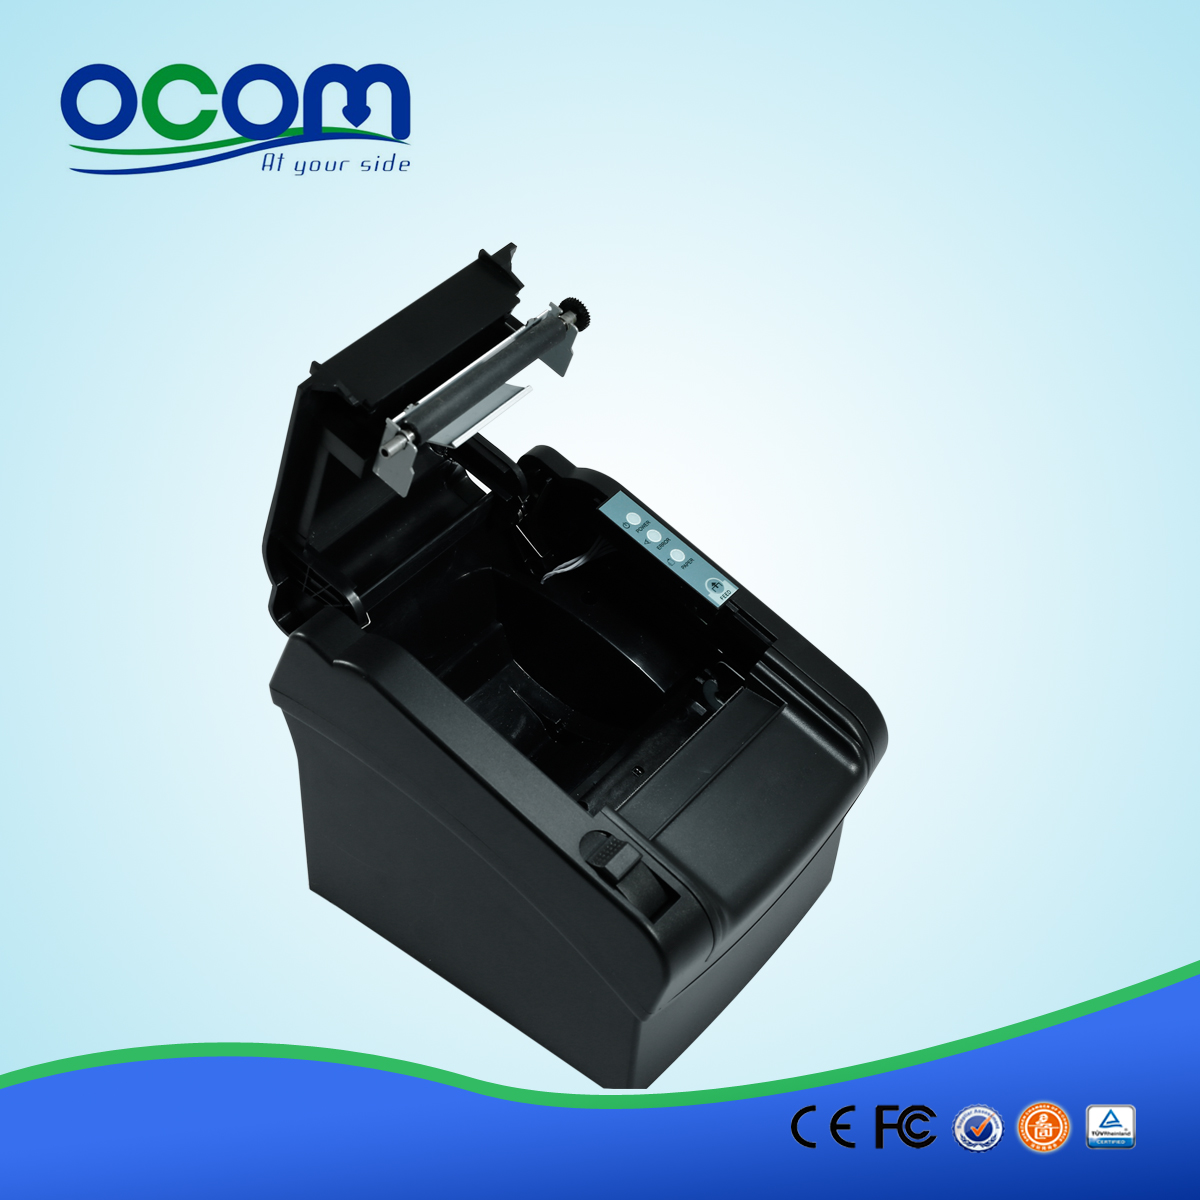 80mm USB Android thermische printer - OCPP-802